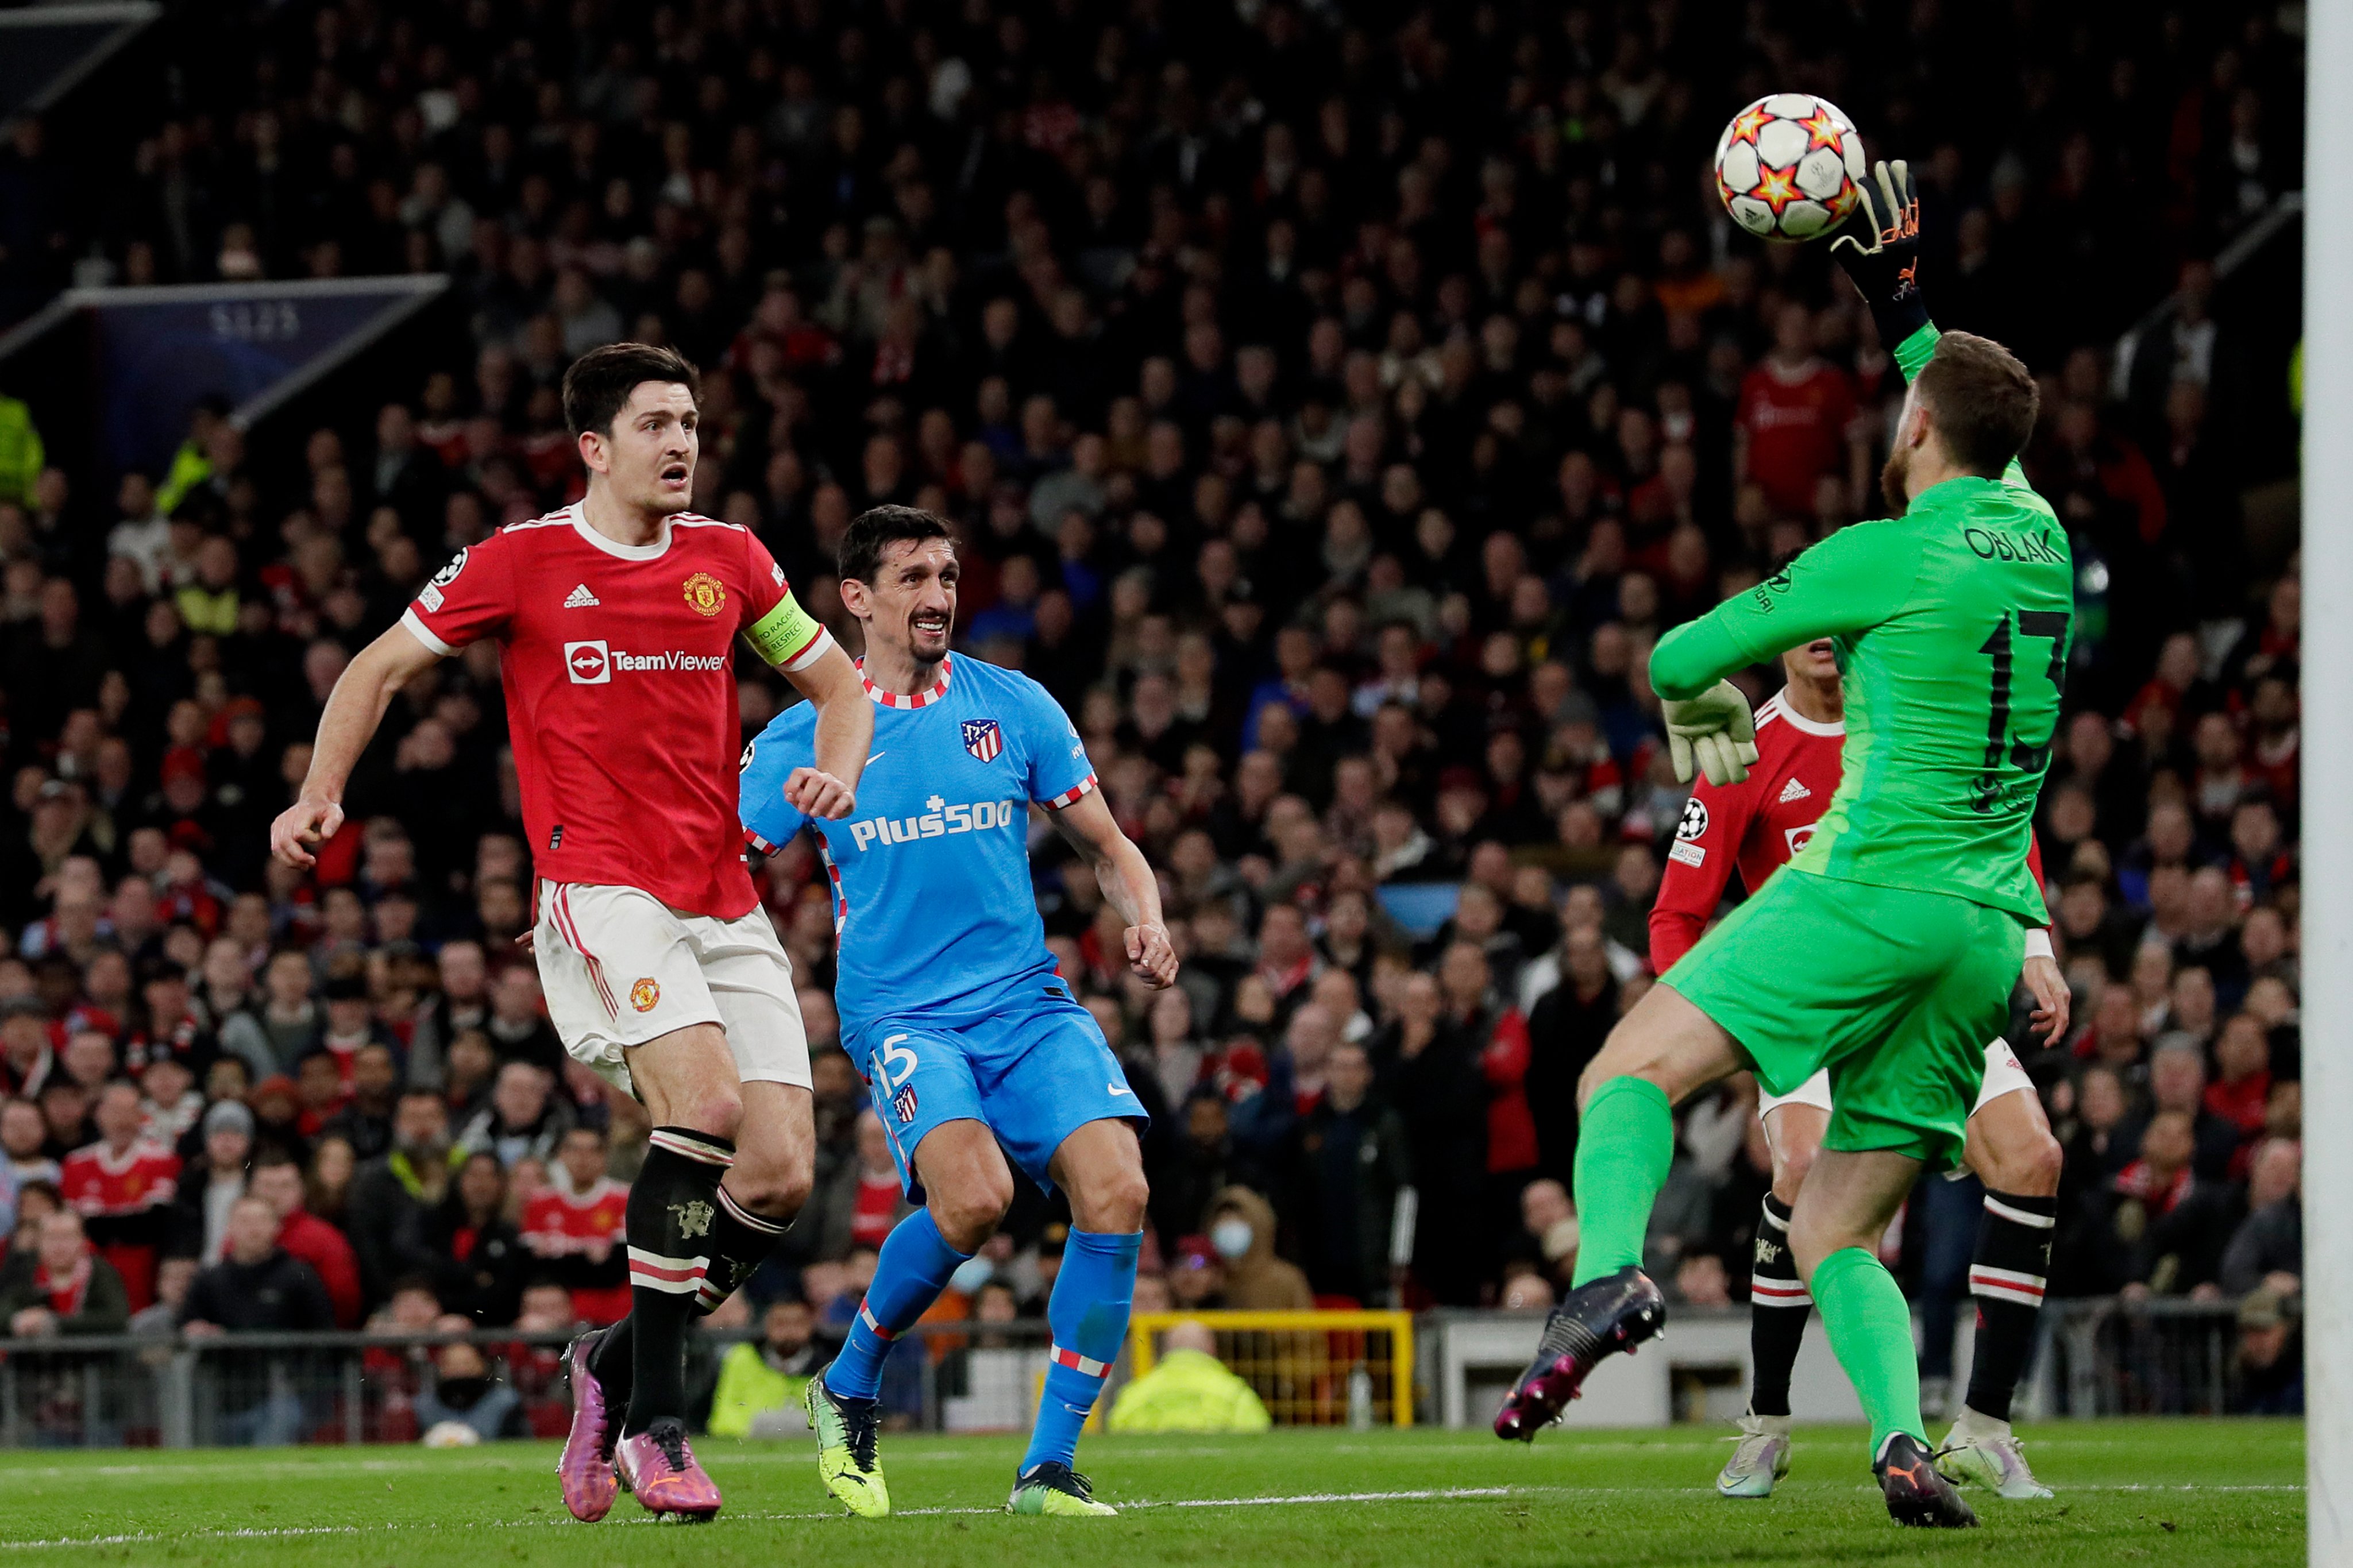 Manchester United 0-1 Atletico Madrid LIVE: Man United and Cristiano Ronaldo are KNOCKED OUT of the Champions League courtesy of Renan Lodi's goal; Oblak with a MOTM performance